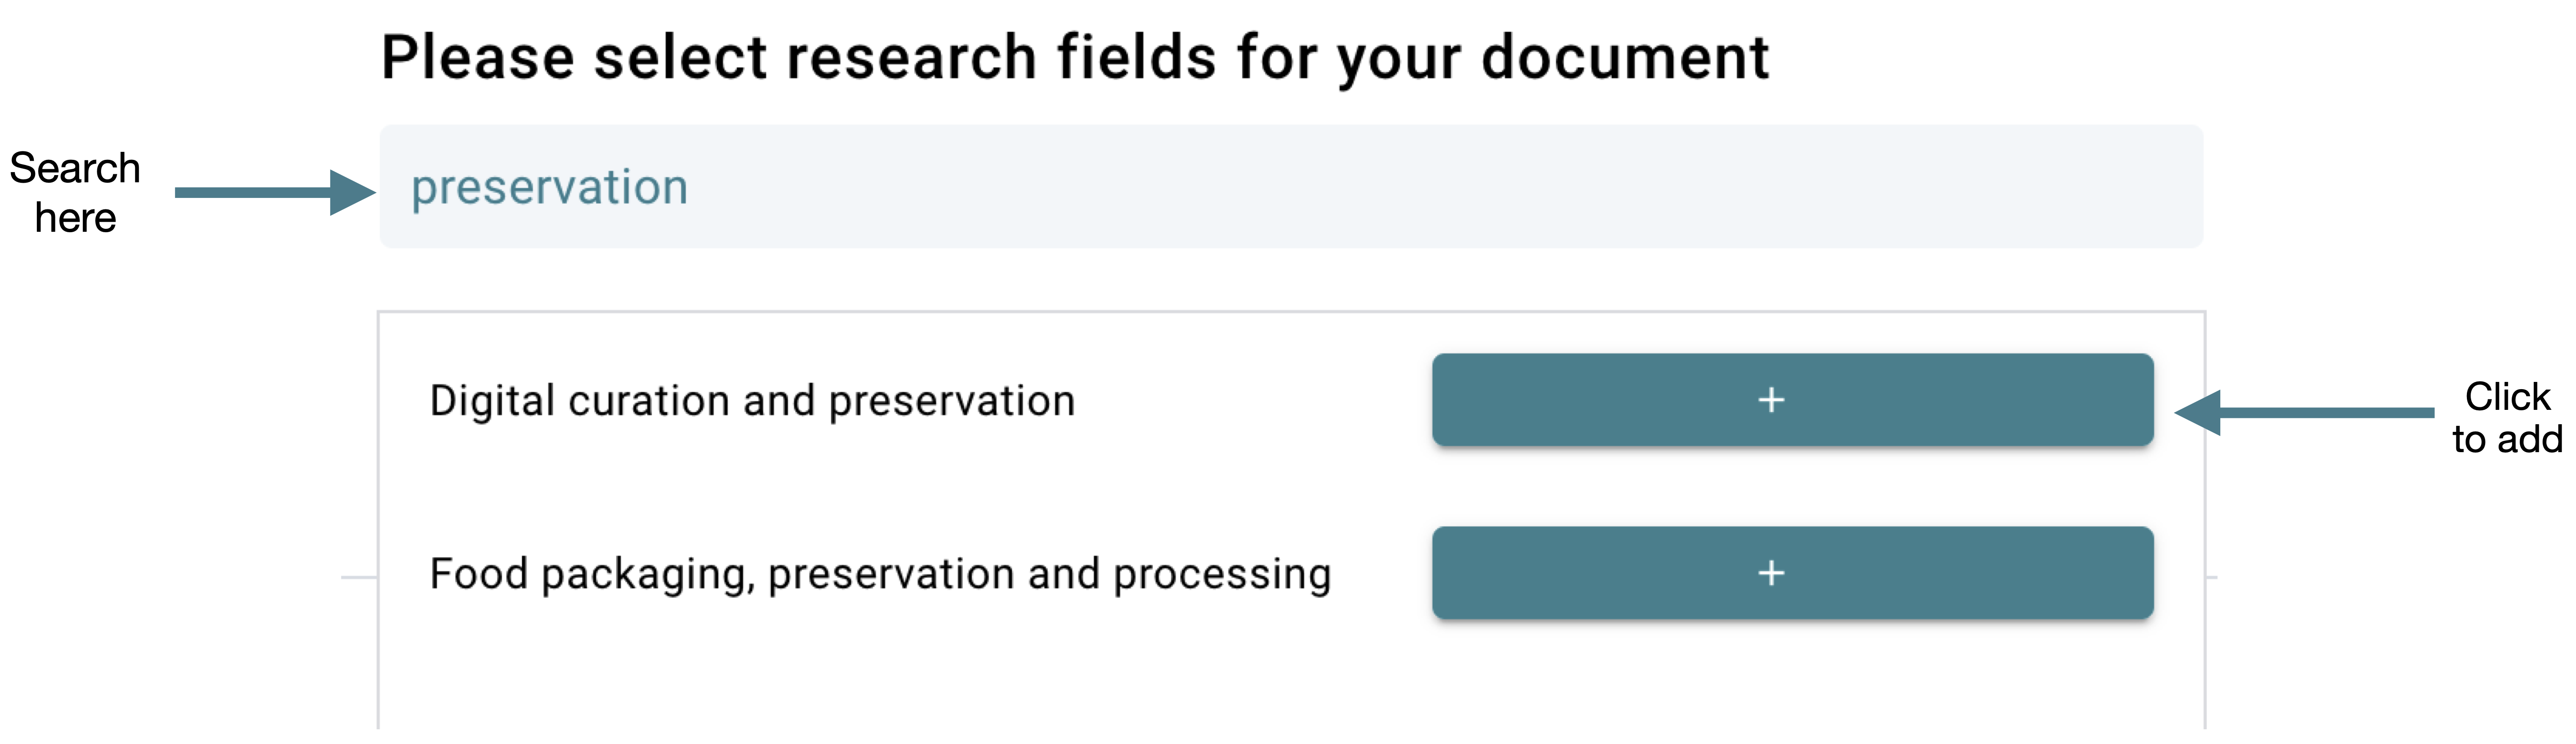 ResearchFields.png